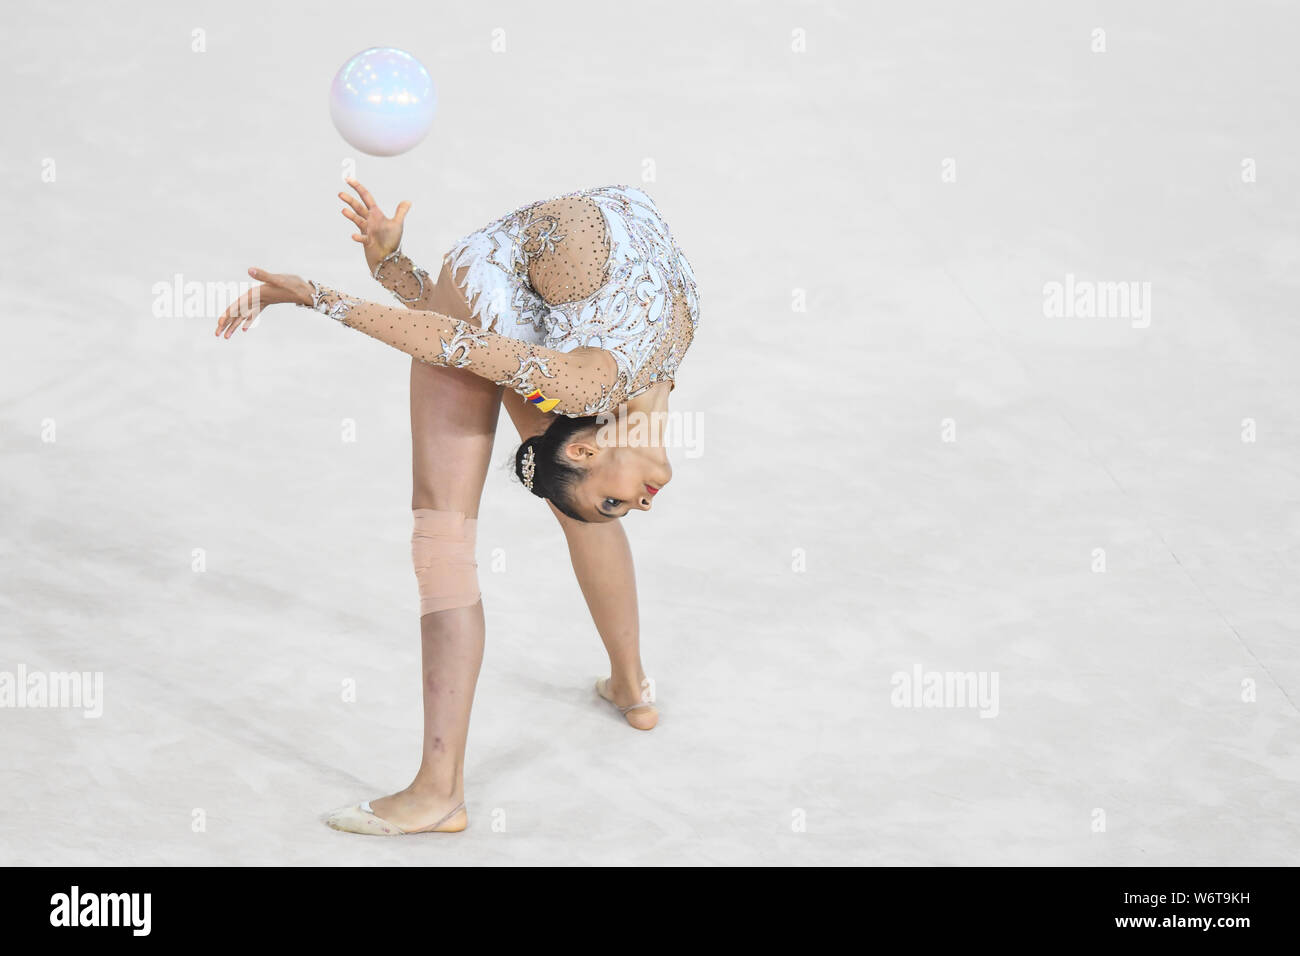 Lima, Peru. 2nd Aug, 2019. ORIANA VINAS from Colombia competes in the individual All-Around with the ball during the competition held in the Polideportivo Villa El Salvador in Lima, Peru. Credit: Amy Sanderson/ZUMA Wire/Alamy Live News Stock Photo